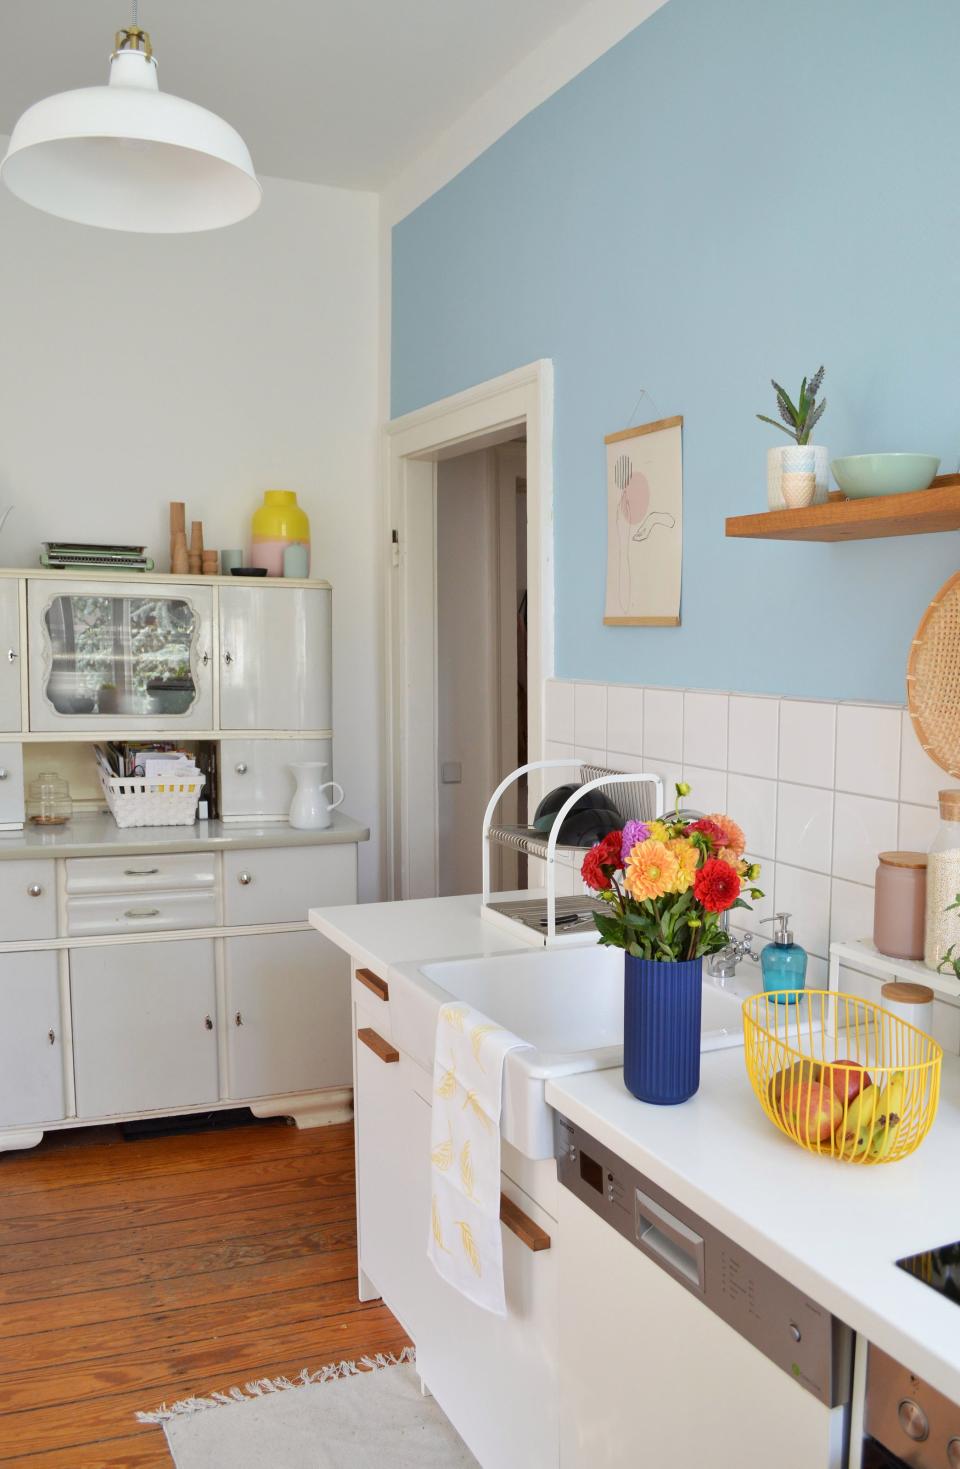 Lots of paint: Jessica is all for painting an entire room a bold hue, but their kitchen was so small that she feared floor-to-ceiling coverage would feel oppressive. Instead, she painted just one wall a cheerful baby blue, which she says reminds her of their vacation home in Sweden. Then there's the moodier shade of blue in the living room. "It's mainly our relaxing area, so I wanted a color to calm us and look noble at the same time," Jessica explains.